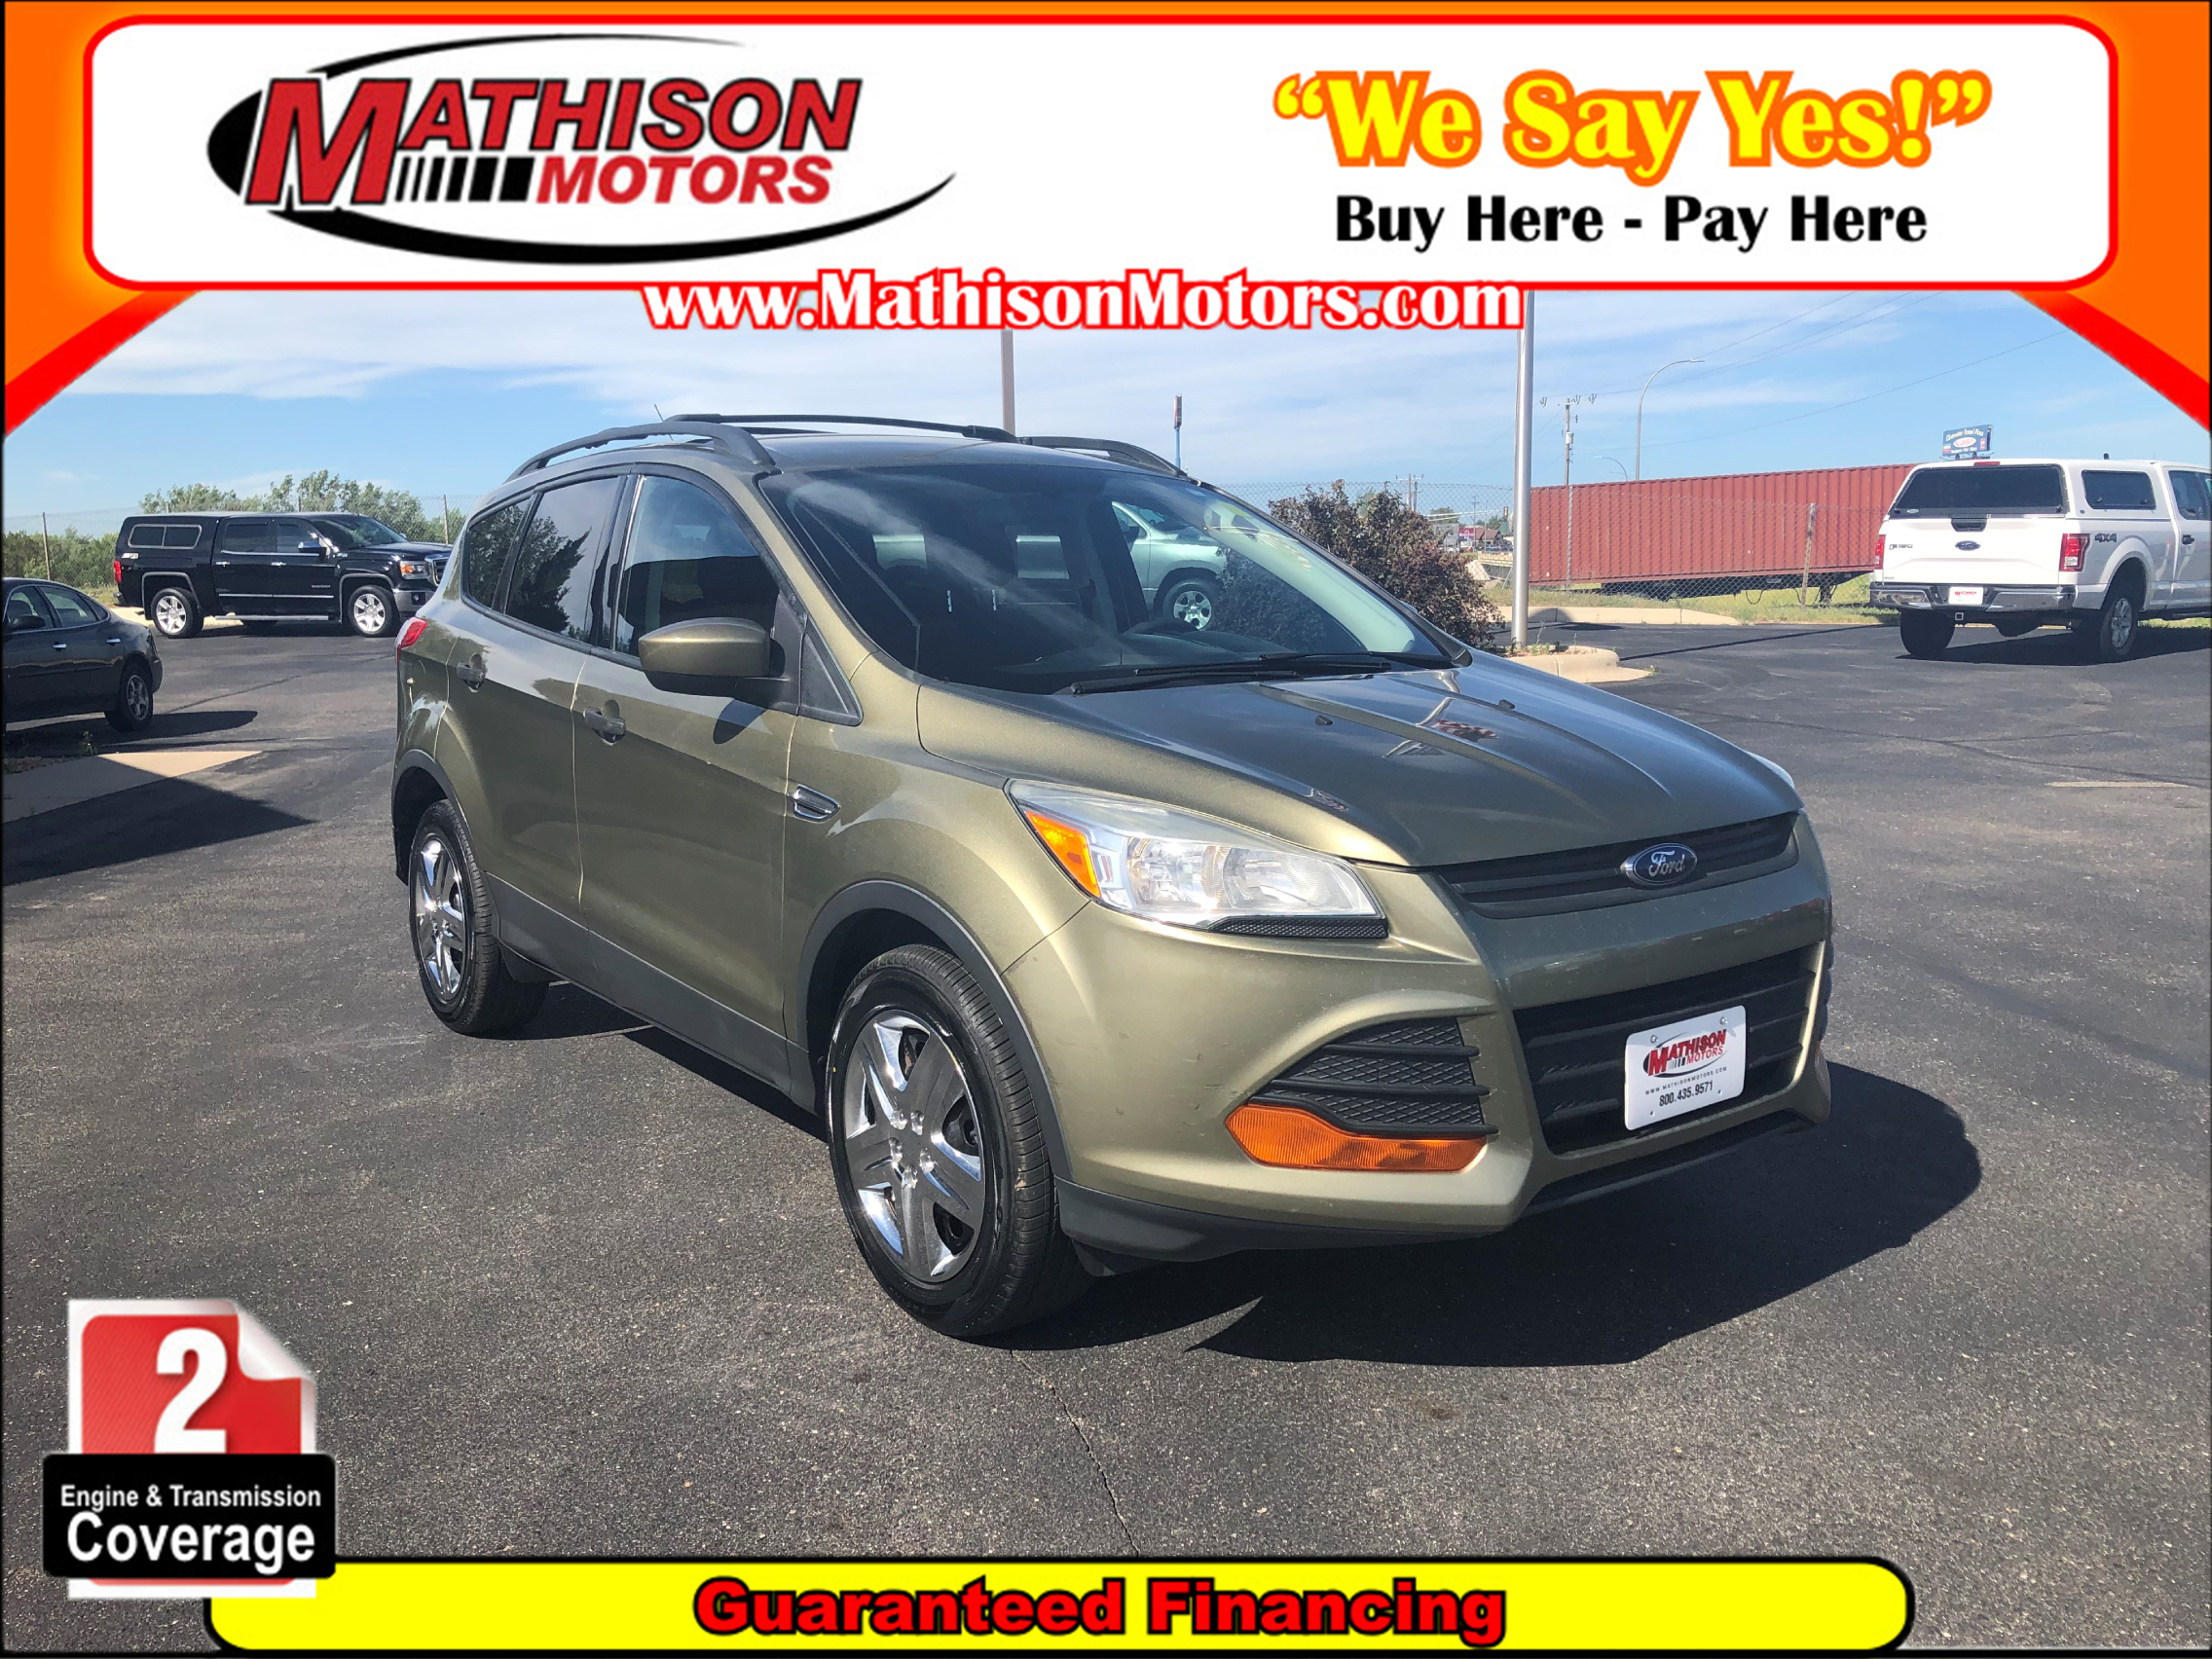 Used FORD ESCAPE 2013 MATHISON S